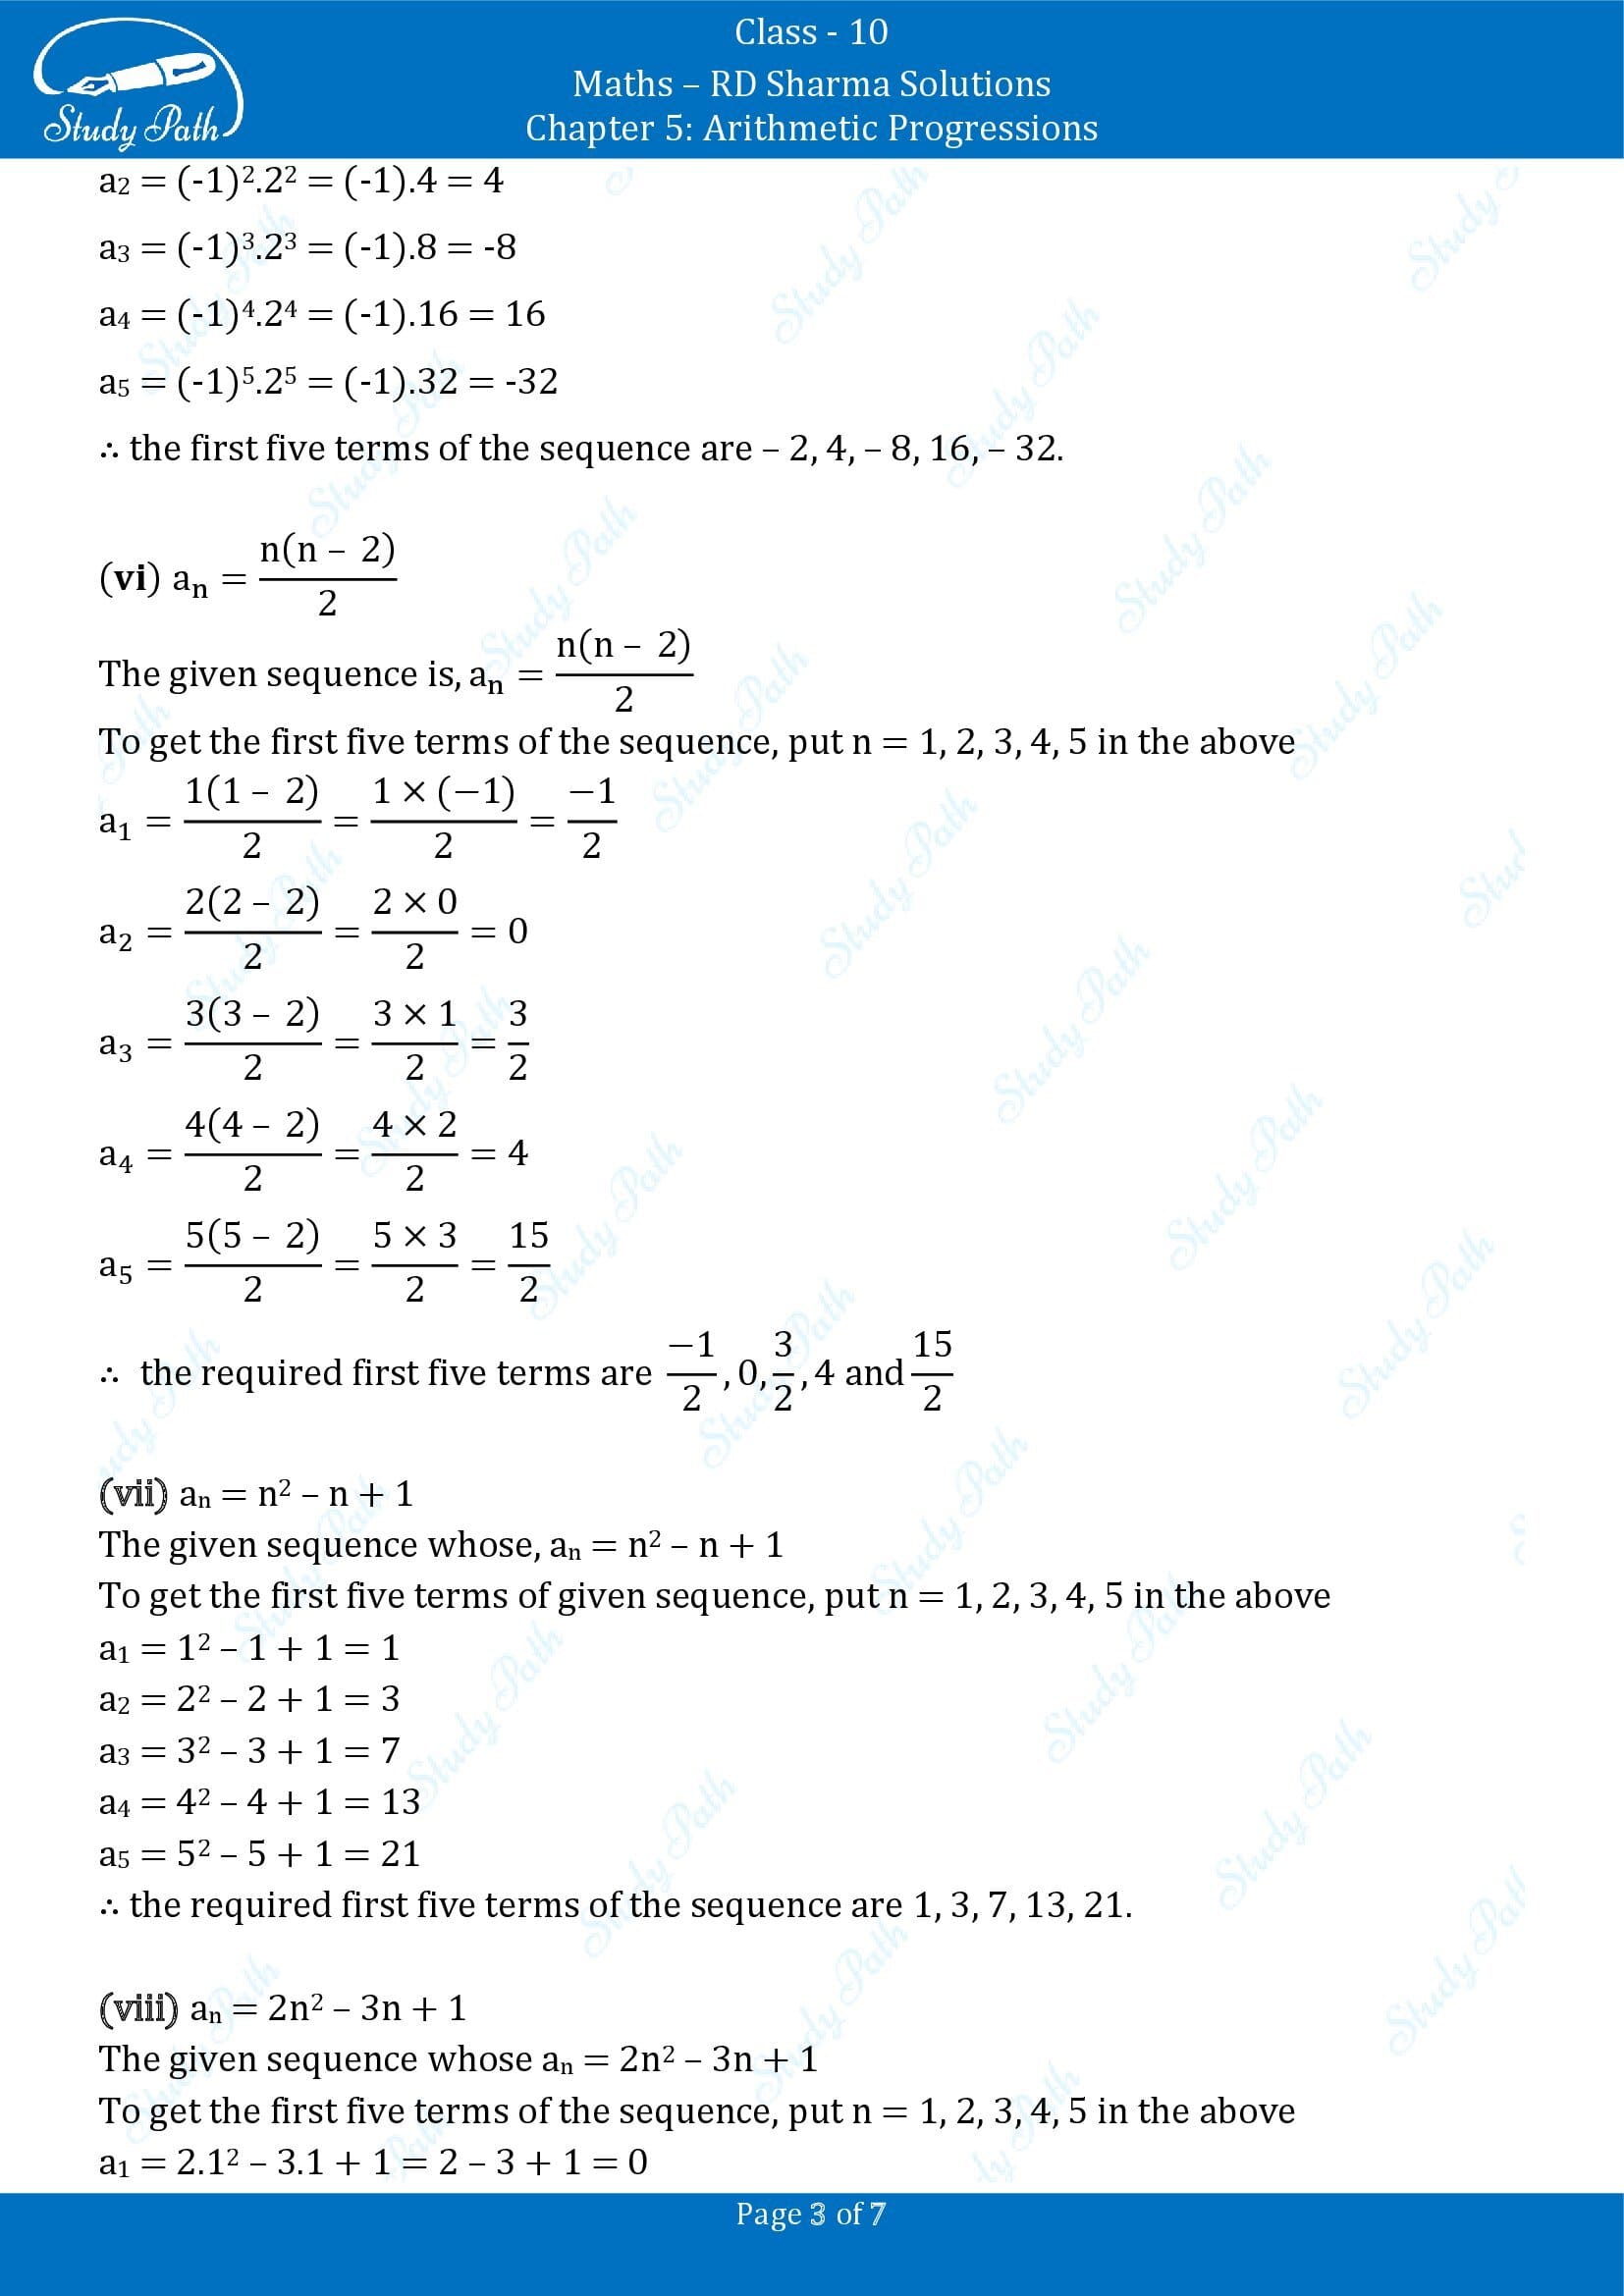 RD Sharma Solutions Class 10 Chapter 5 Arithmetic Progressions Exercise 5.1 00003